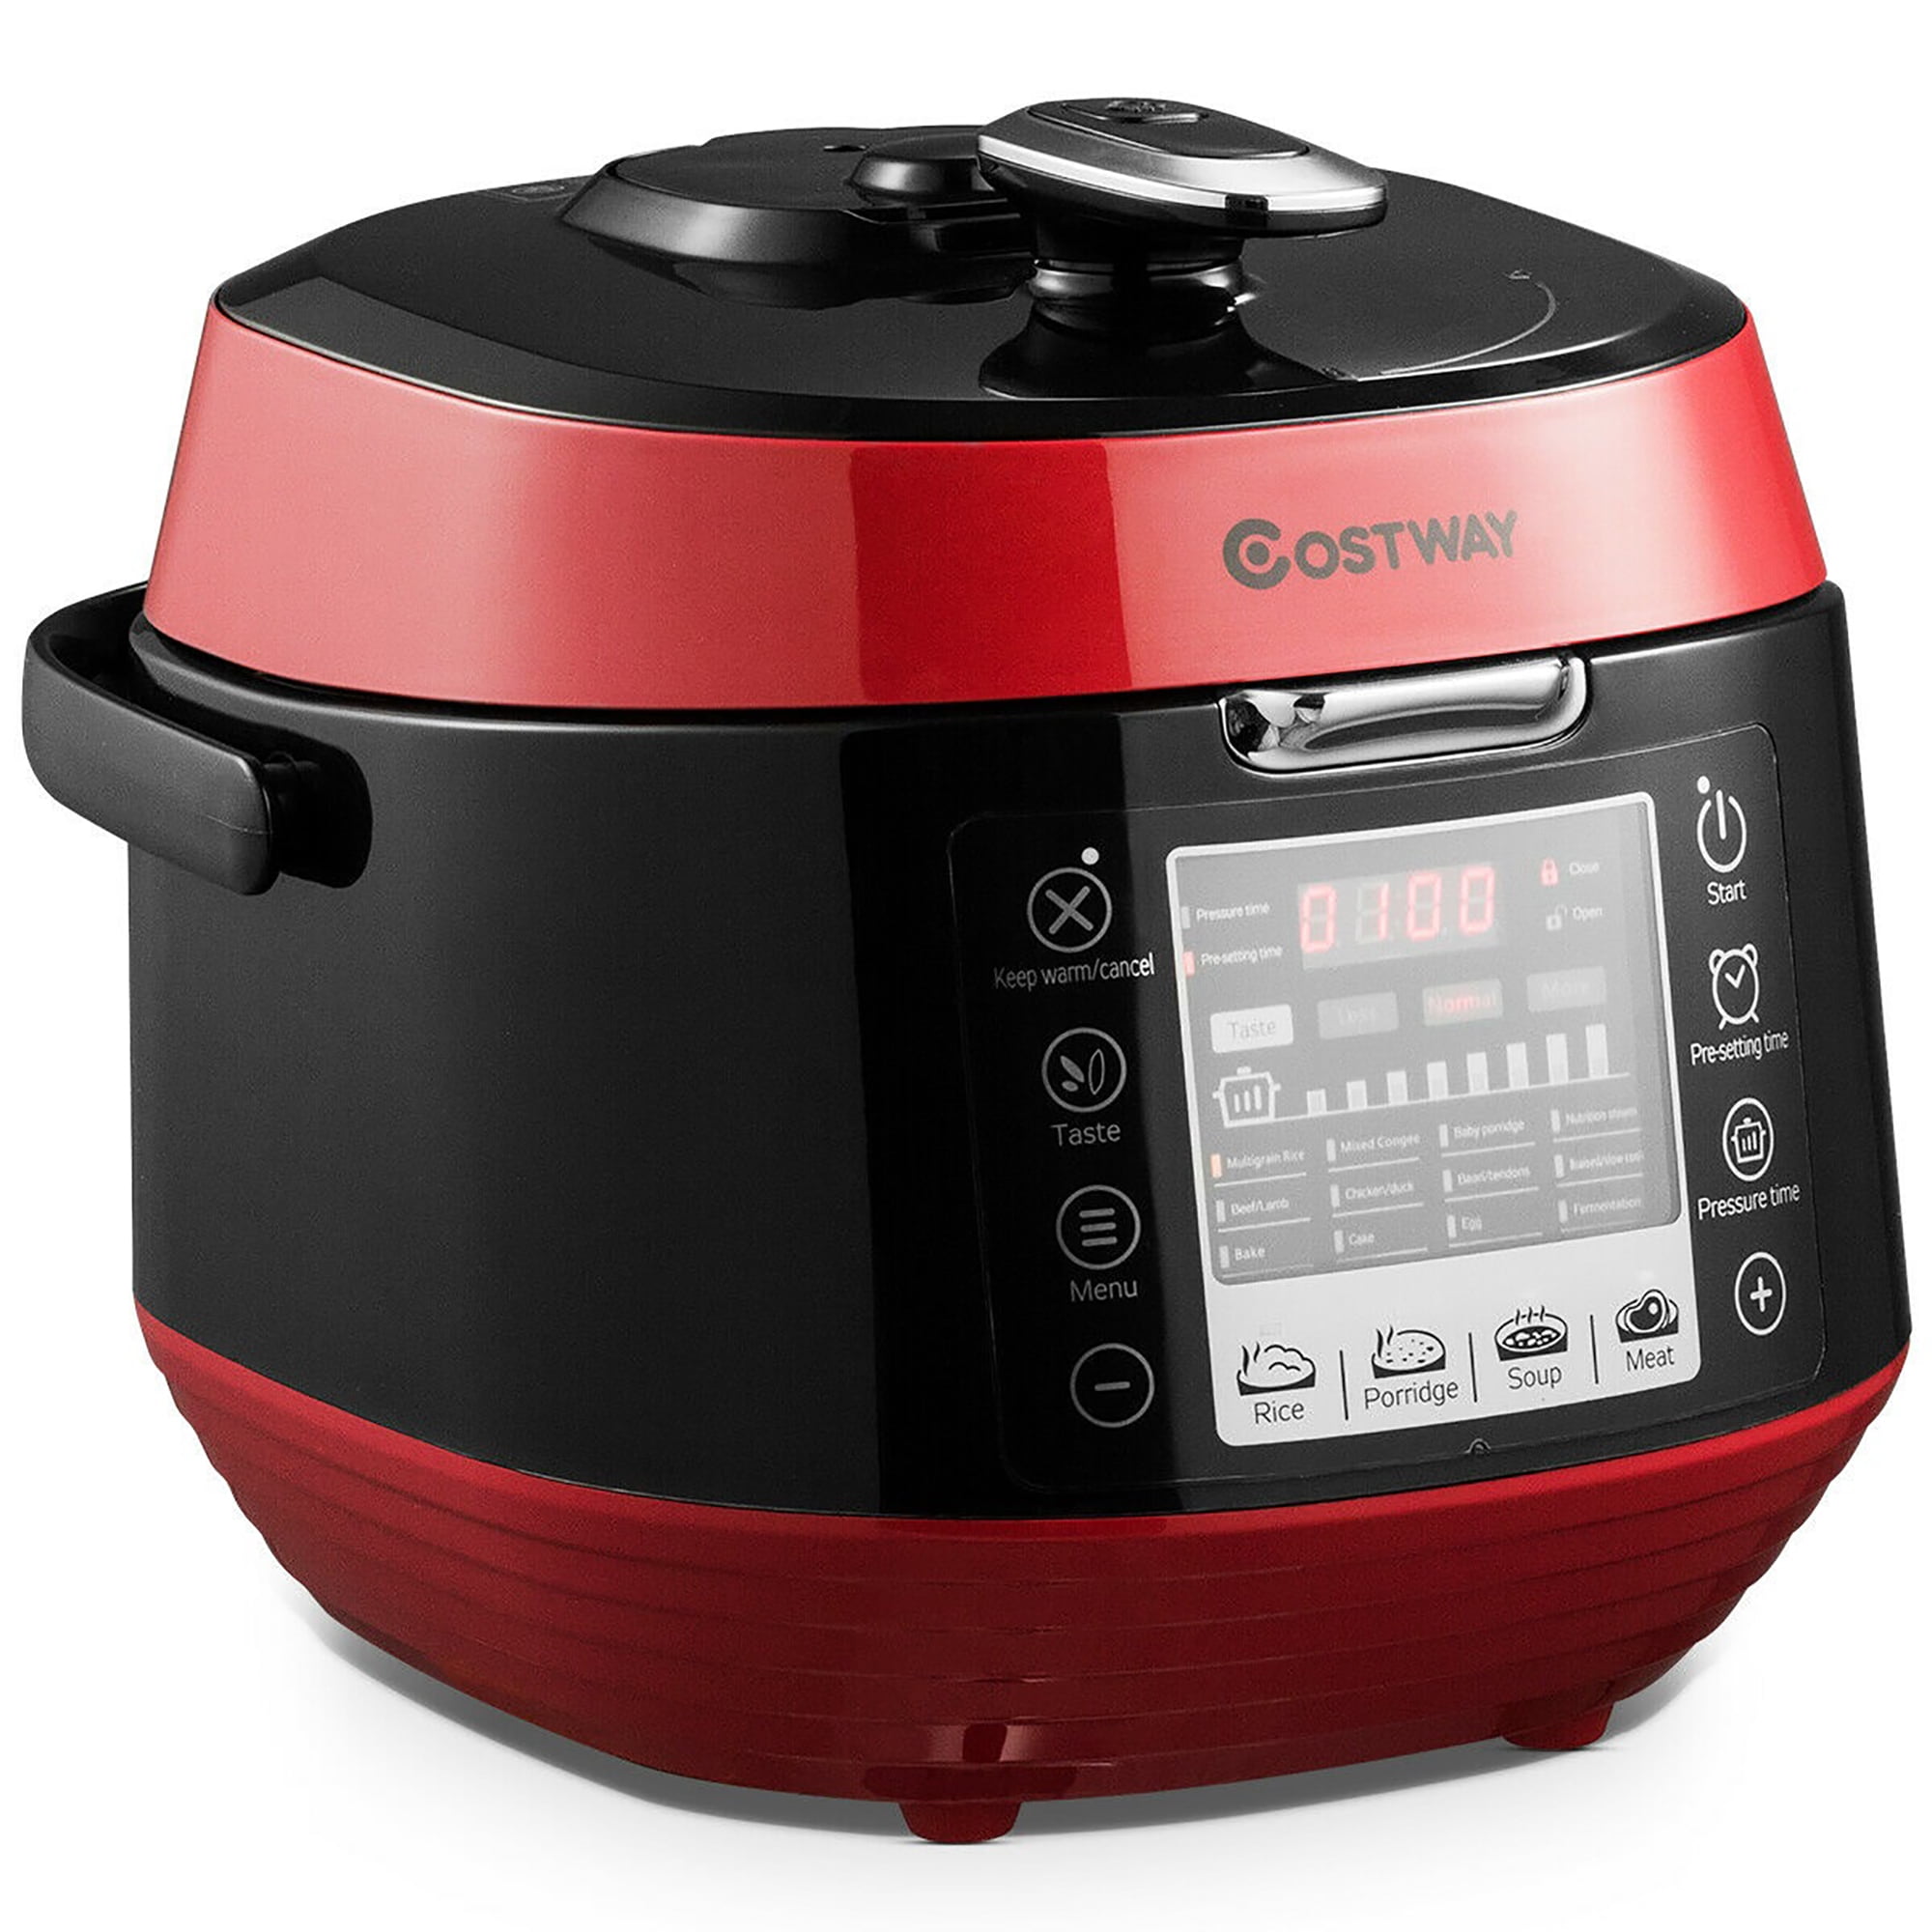 Costway 5.3 Qt 12-in-1 Programmable Multi-use Electric Pressure Cooker ...